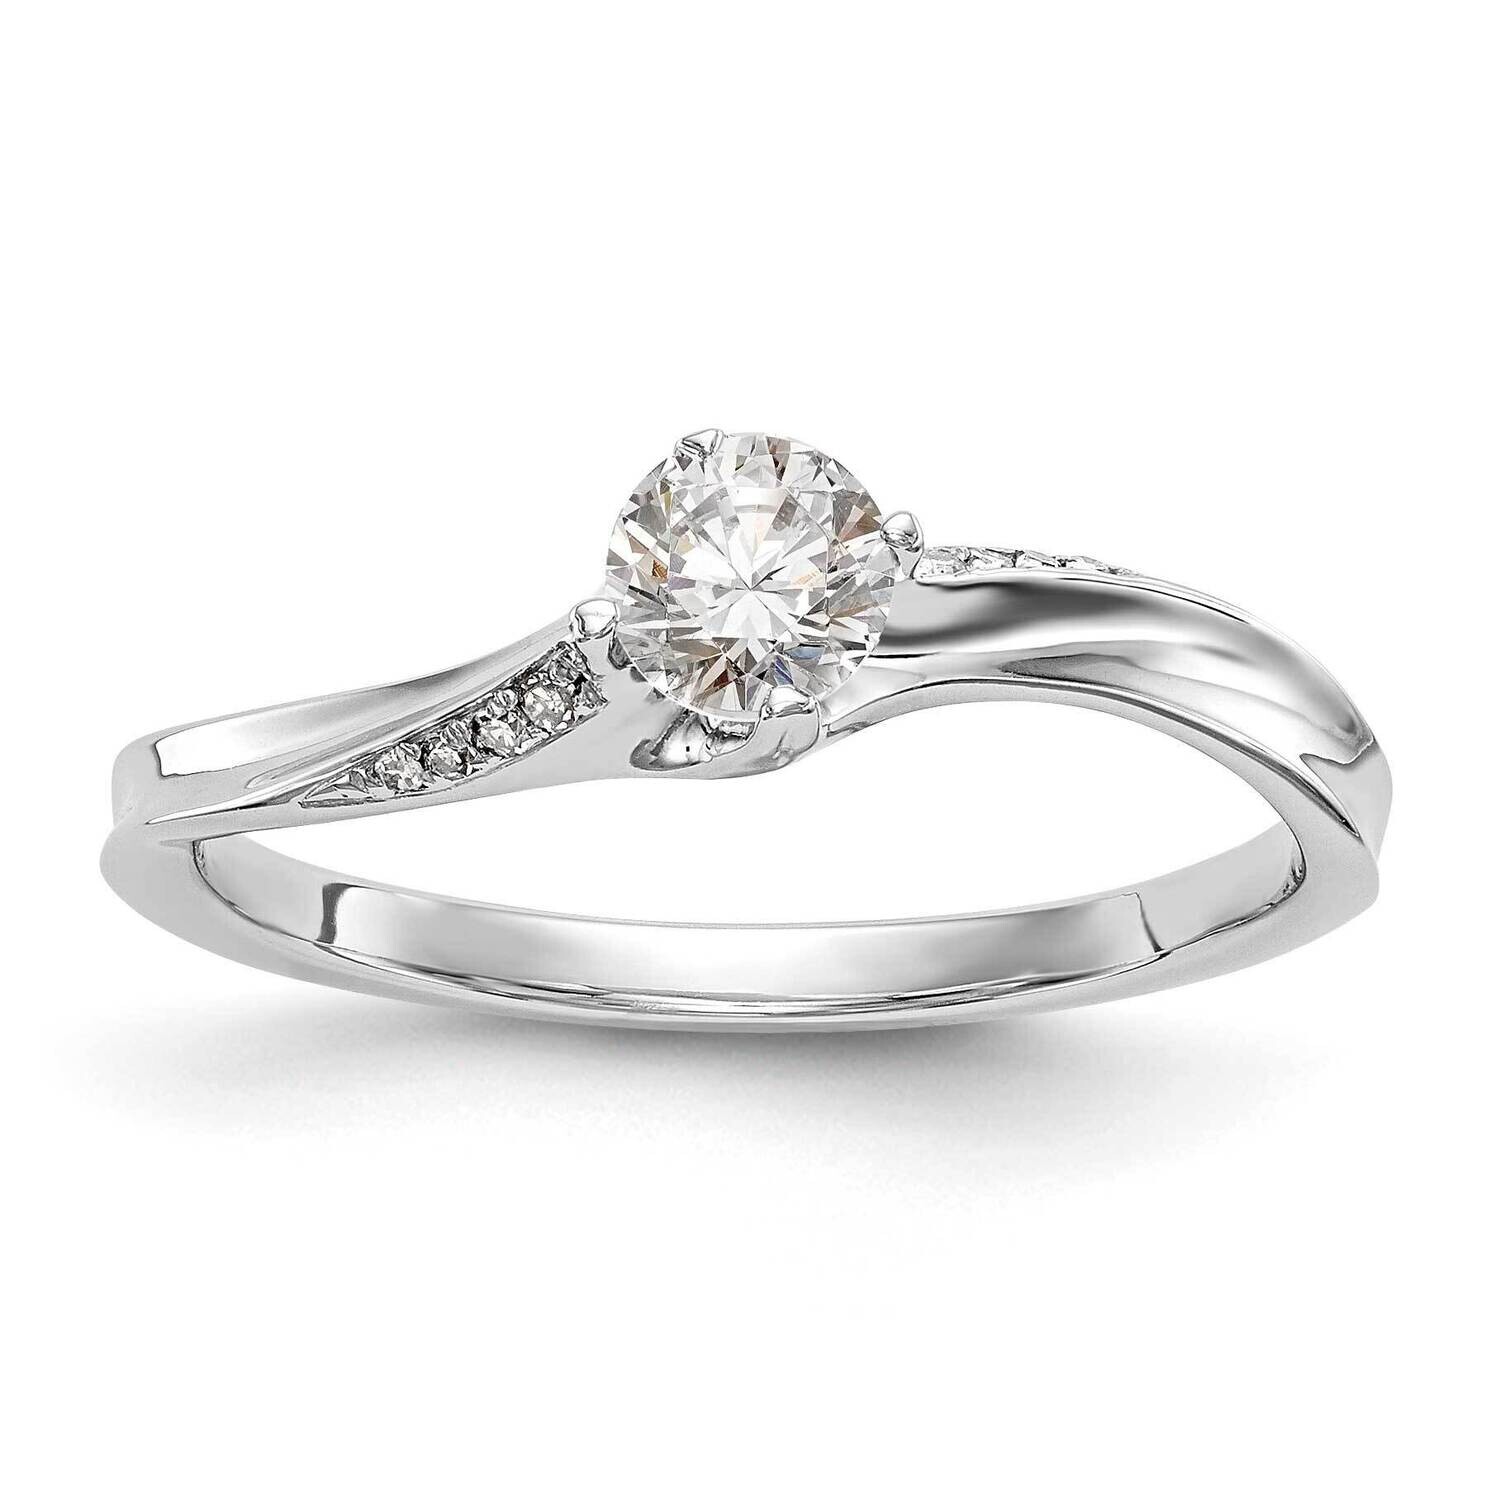 By-Pass Holds 1/4 Carat 4.1mm Round Center .03 Carat Diamond Semi-Mount Engagement Ring 14k White Gold RM2400E-025-WAA